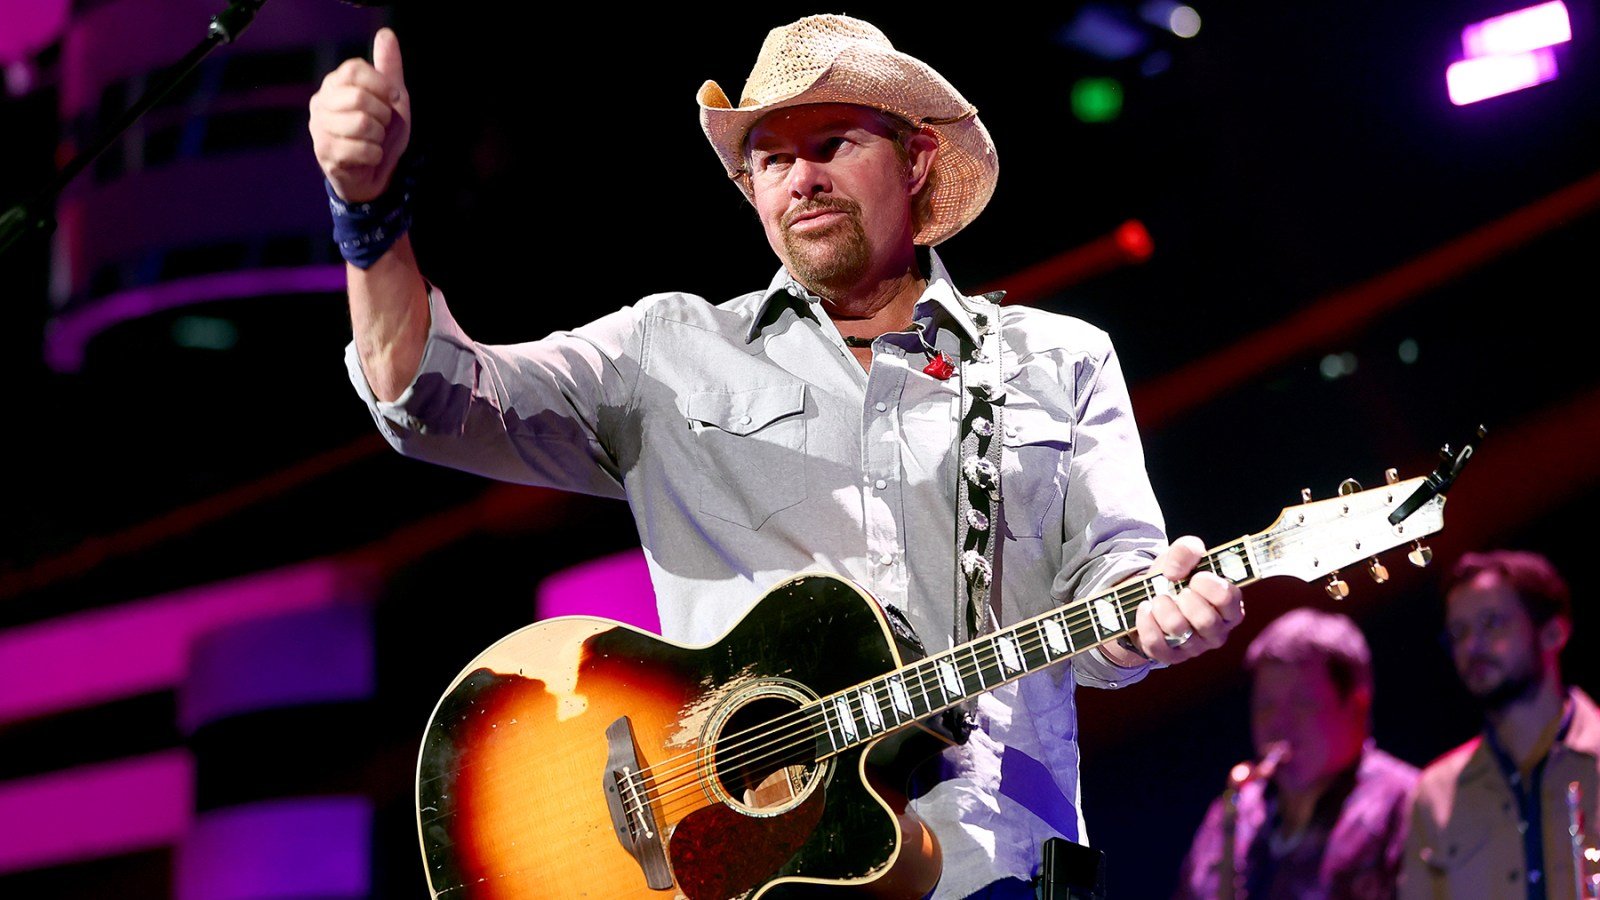 Toby Keith Tribute Concert Shows Country Music Is Still Grieving a Major Loss